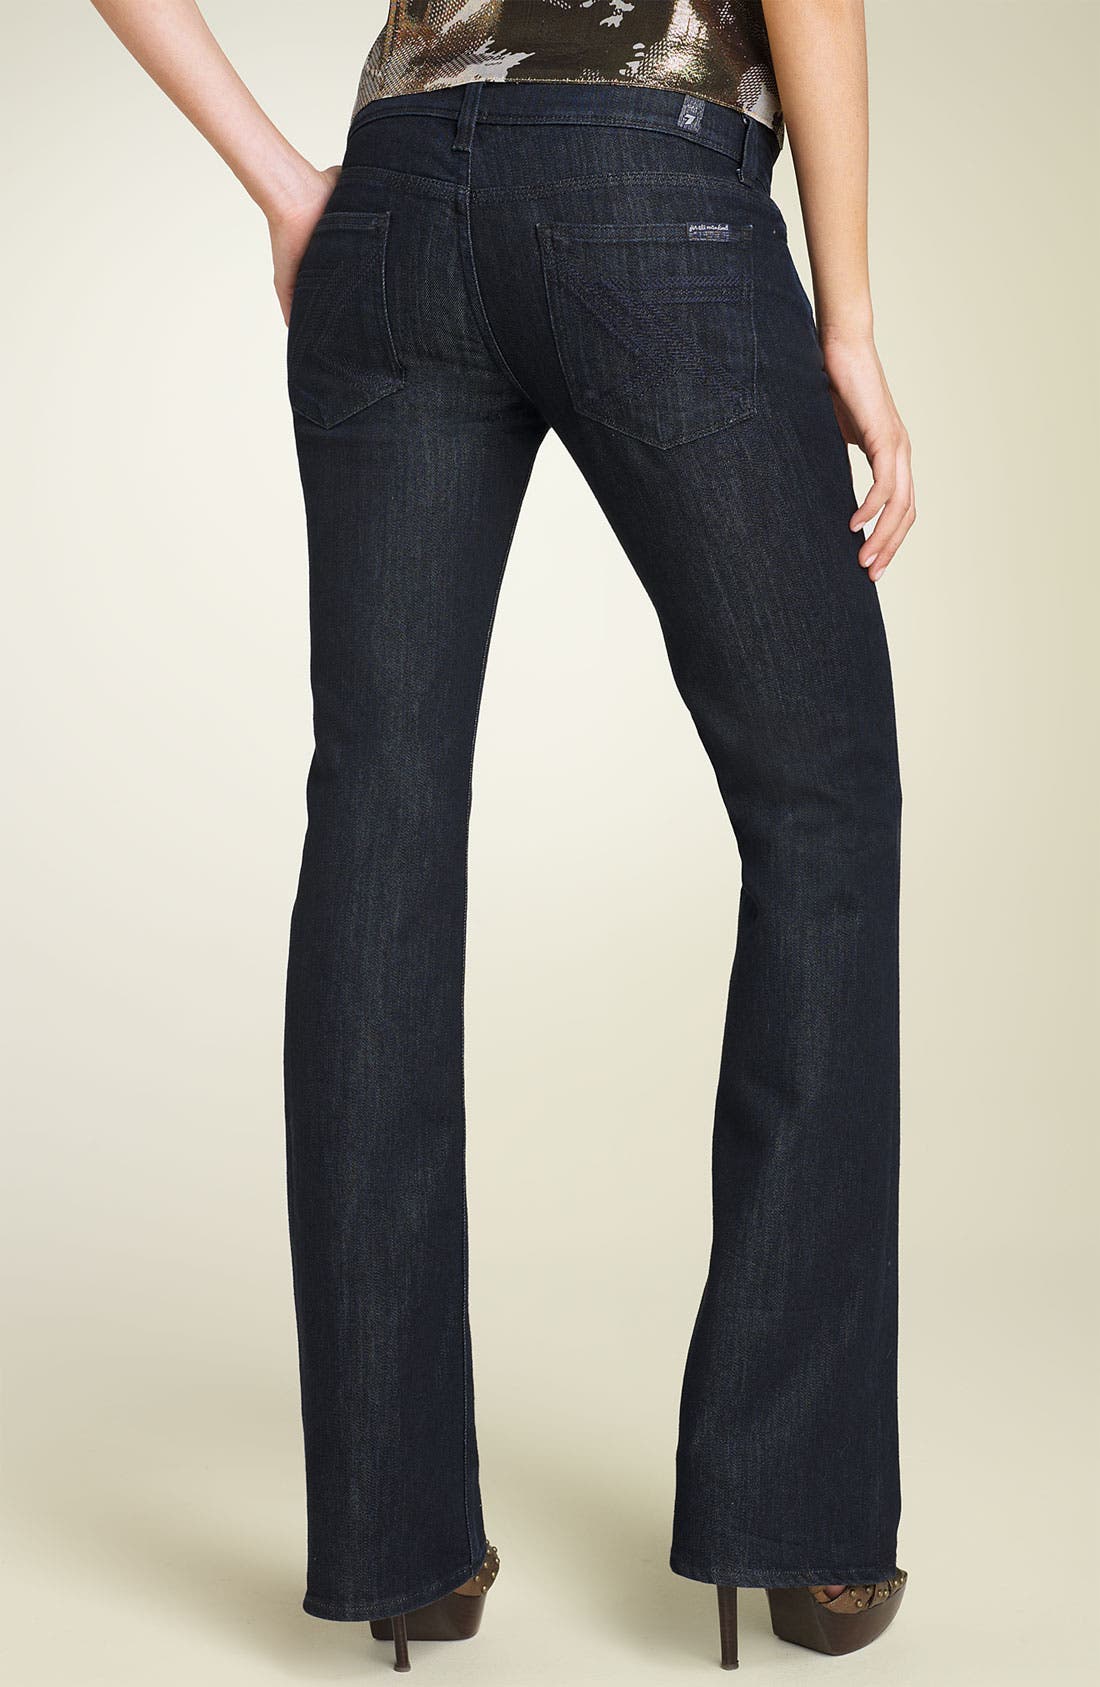 7 for all mankind flynt jeans